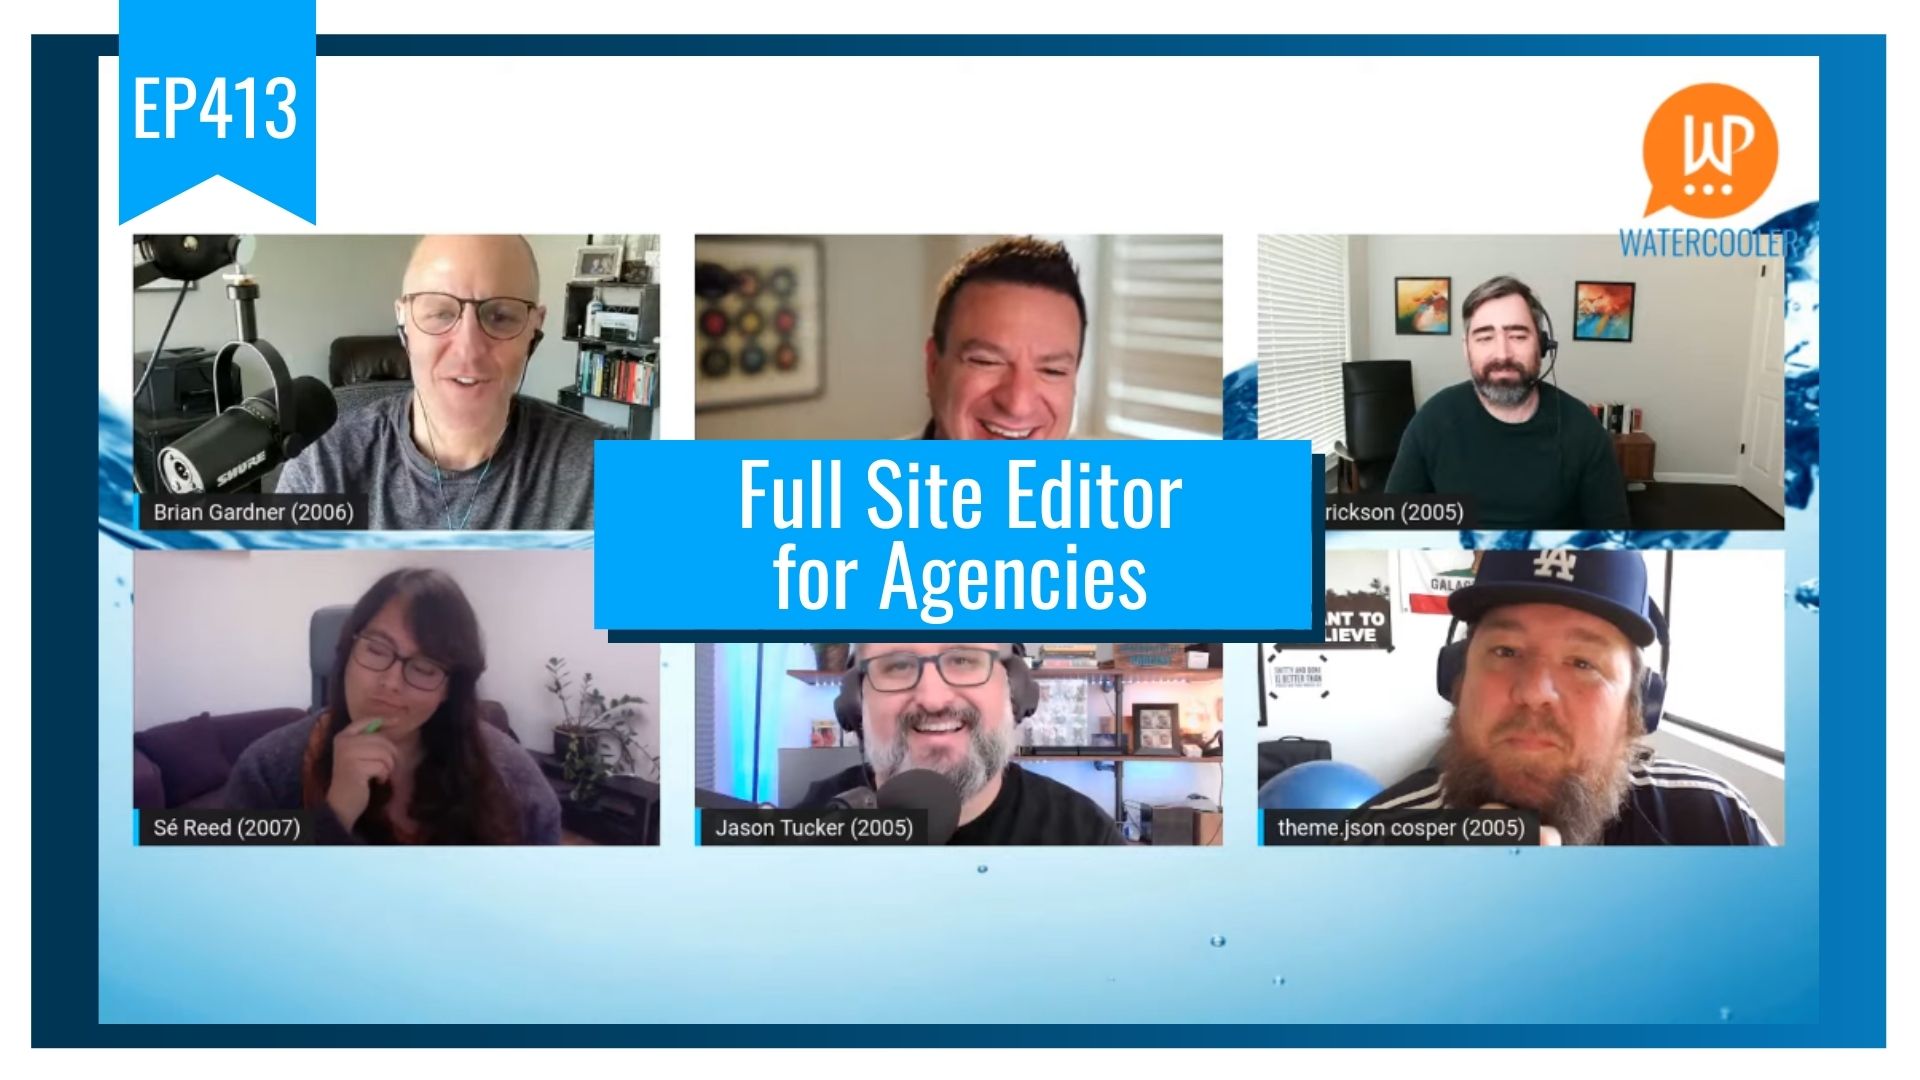 EP413 - Full Site Editor for Agencies